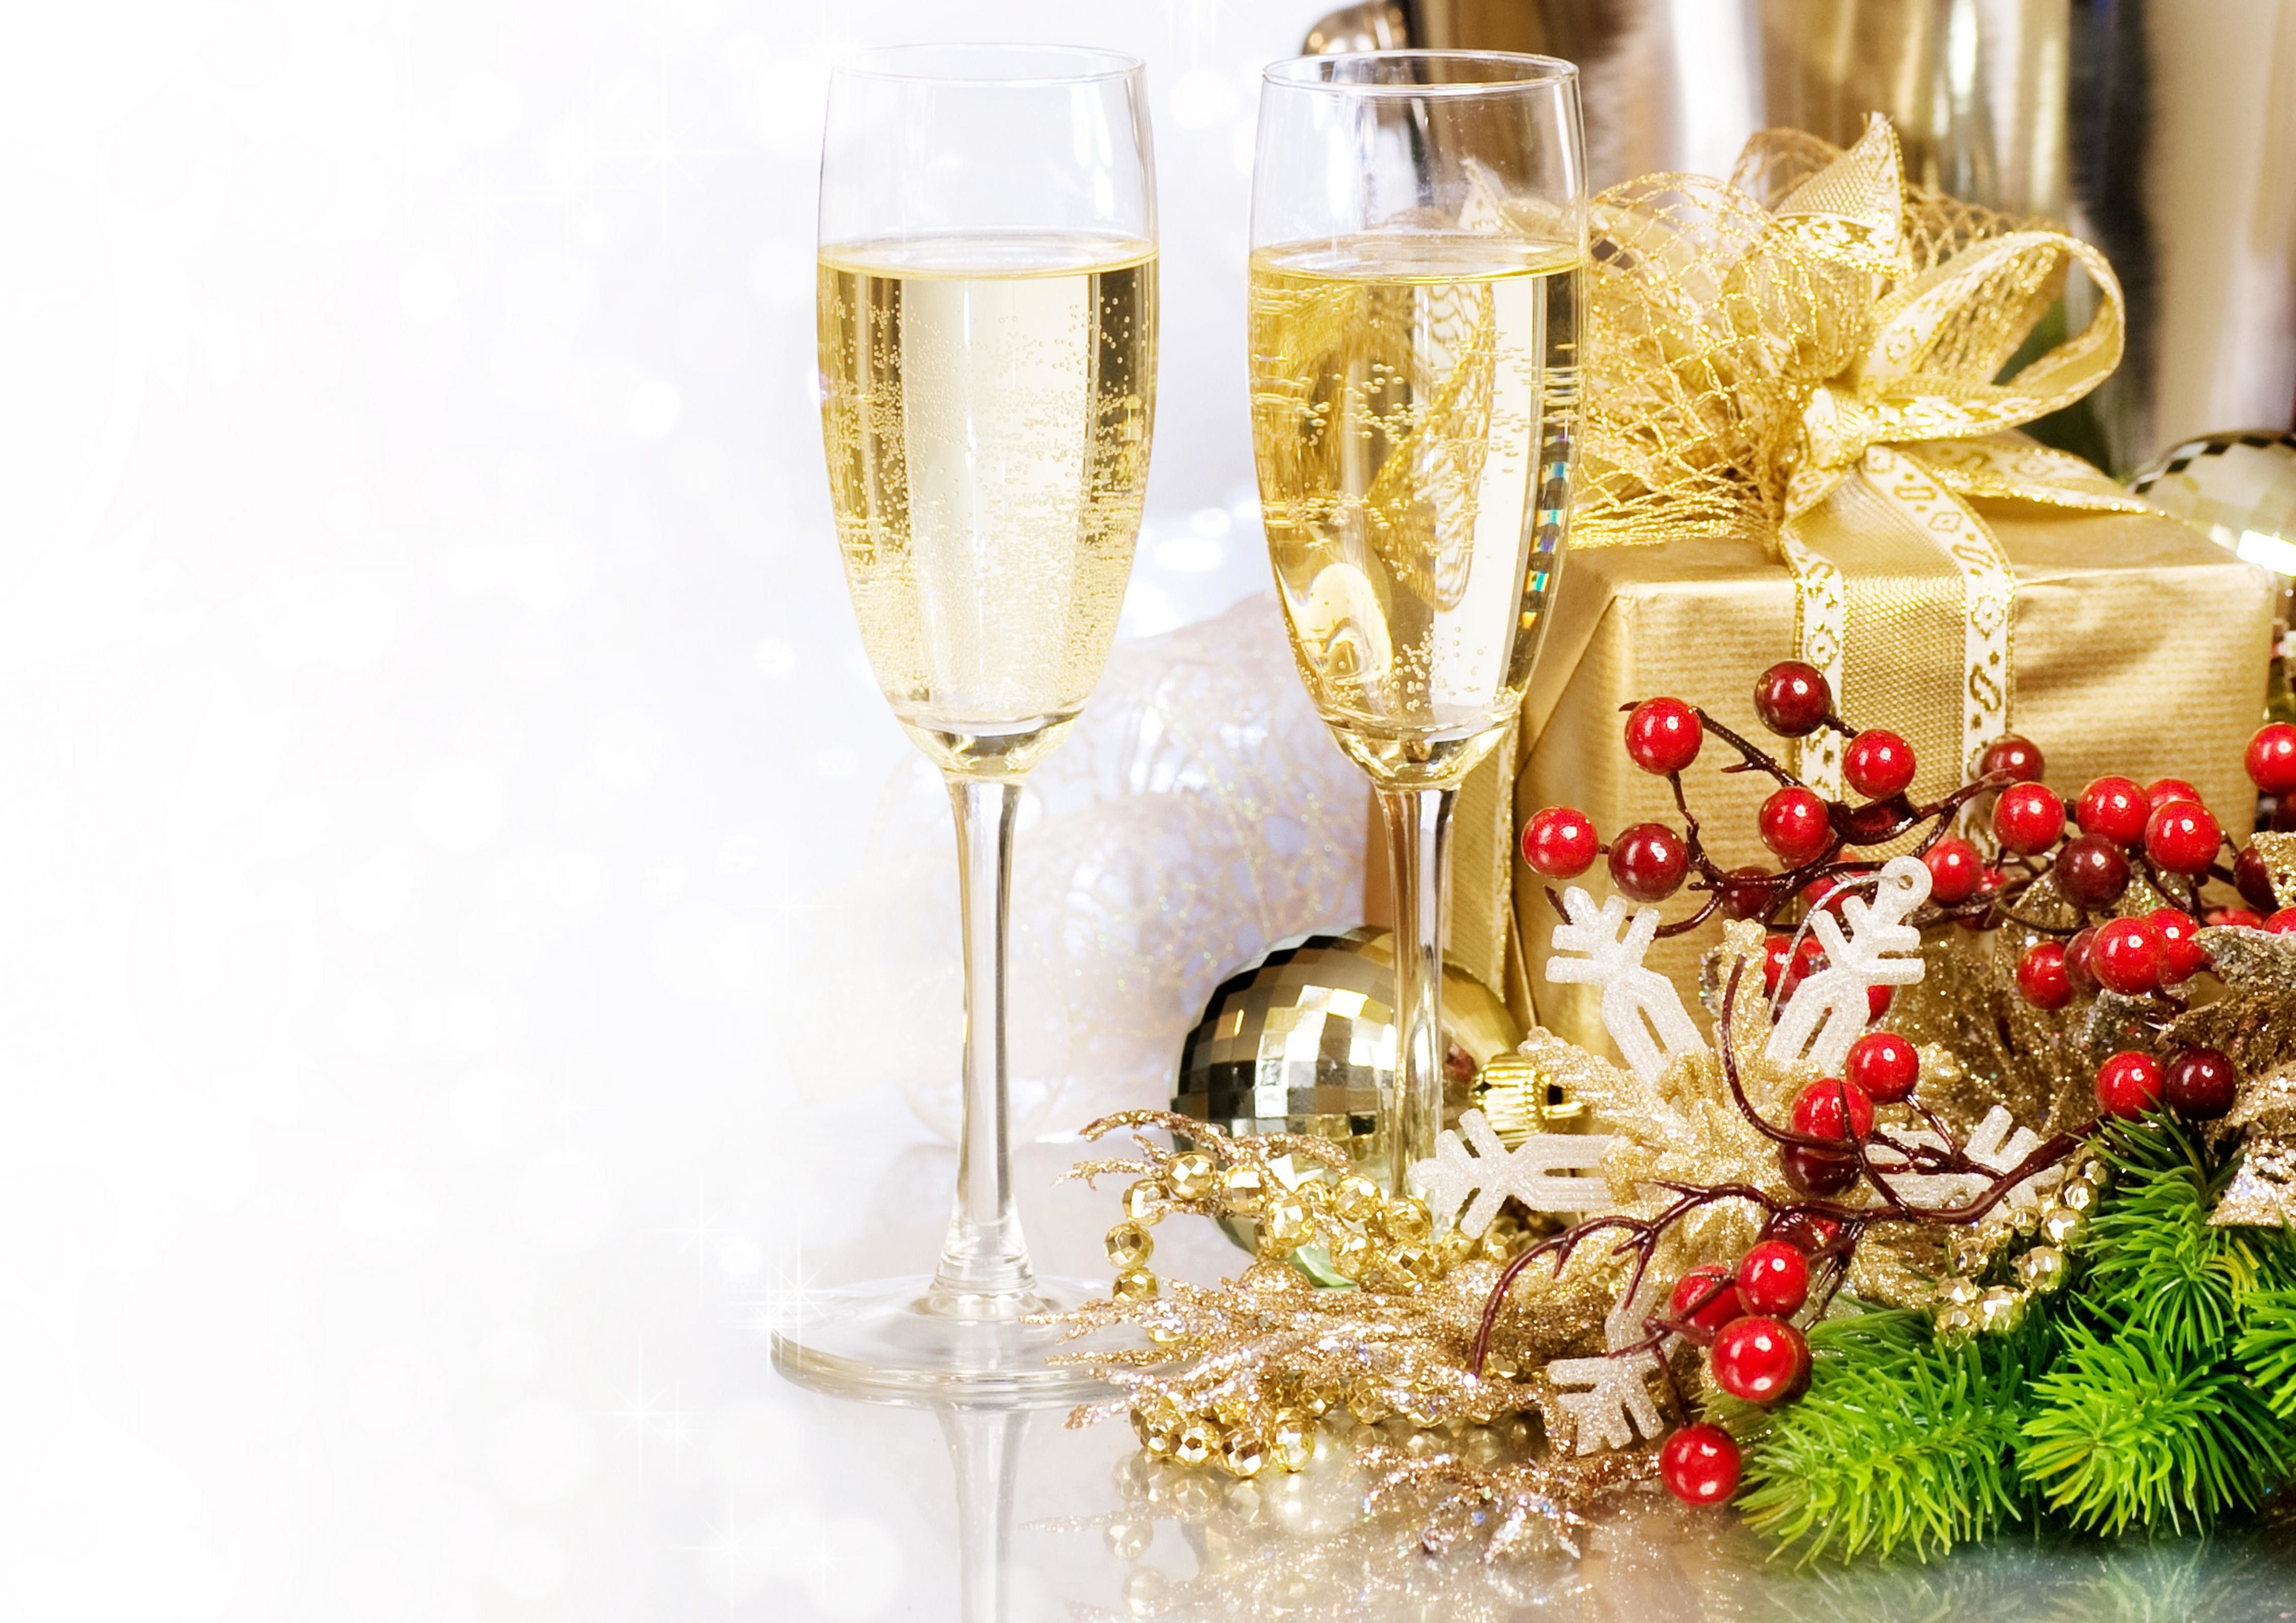 Christmas presents and champagne for the New Year. Happy New Year! Wallpaper. Christmas, Easter, Valentine's Da. Champagne, Christmas presents, Holiday wallpaper